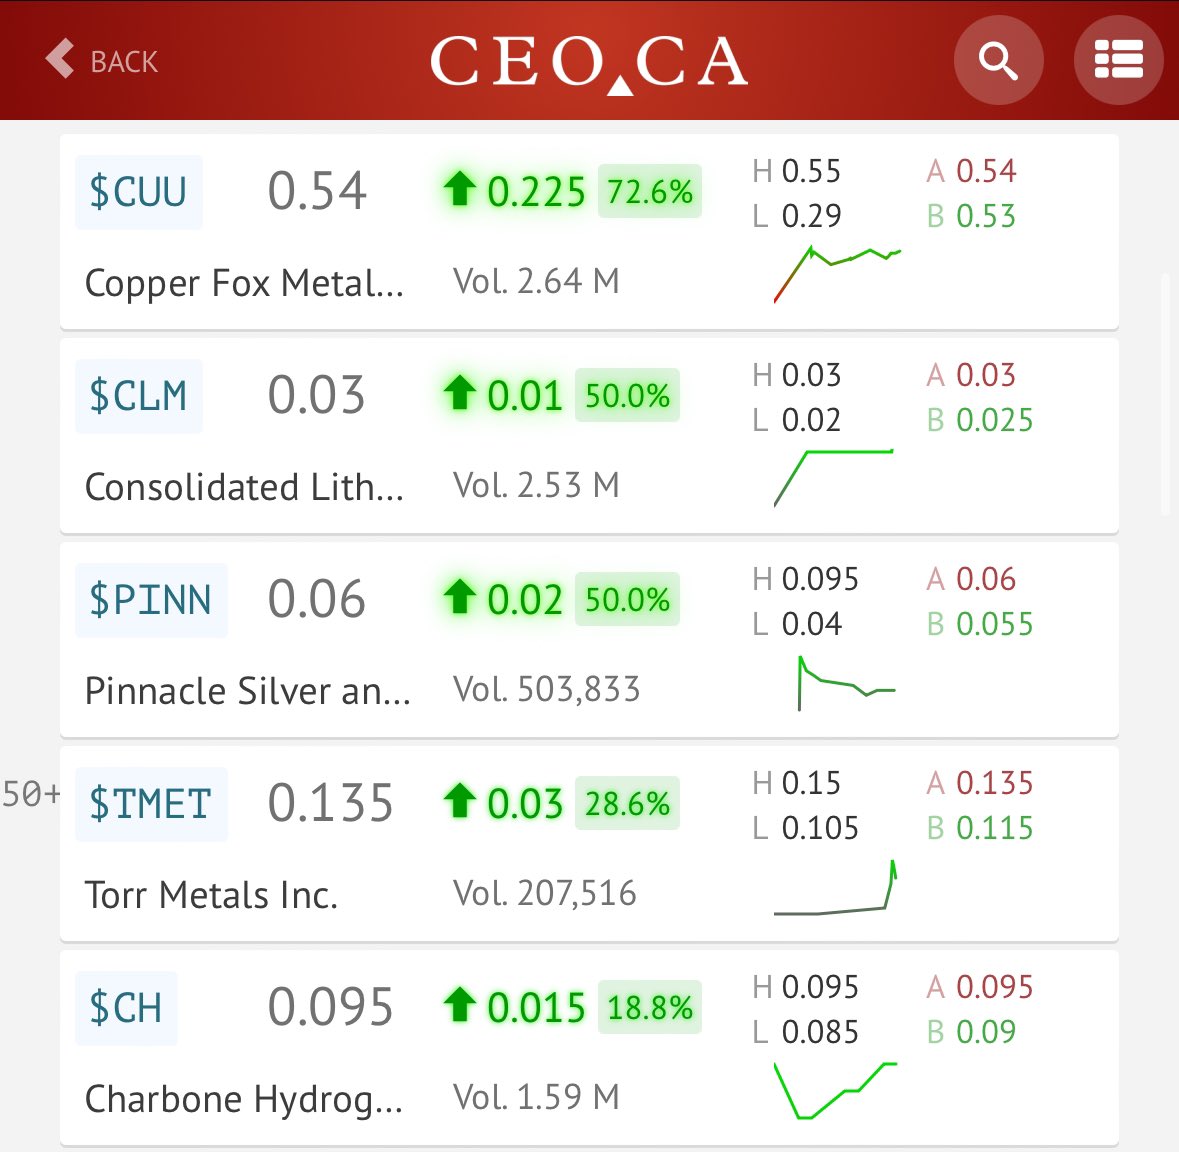 ⛏️📈MID-DAY METALS AND MINING GAINERS ON CEO.CA: Track what's trending: bit.ly/CEO-CA $CUU.V $CLM.V $PINN.V $TMET.V $CH.V